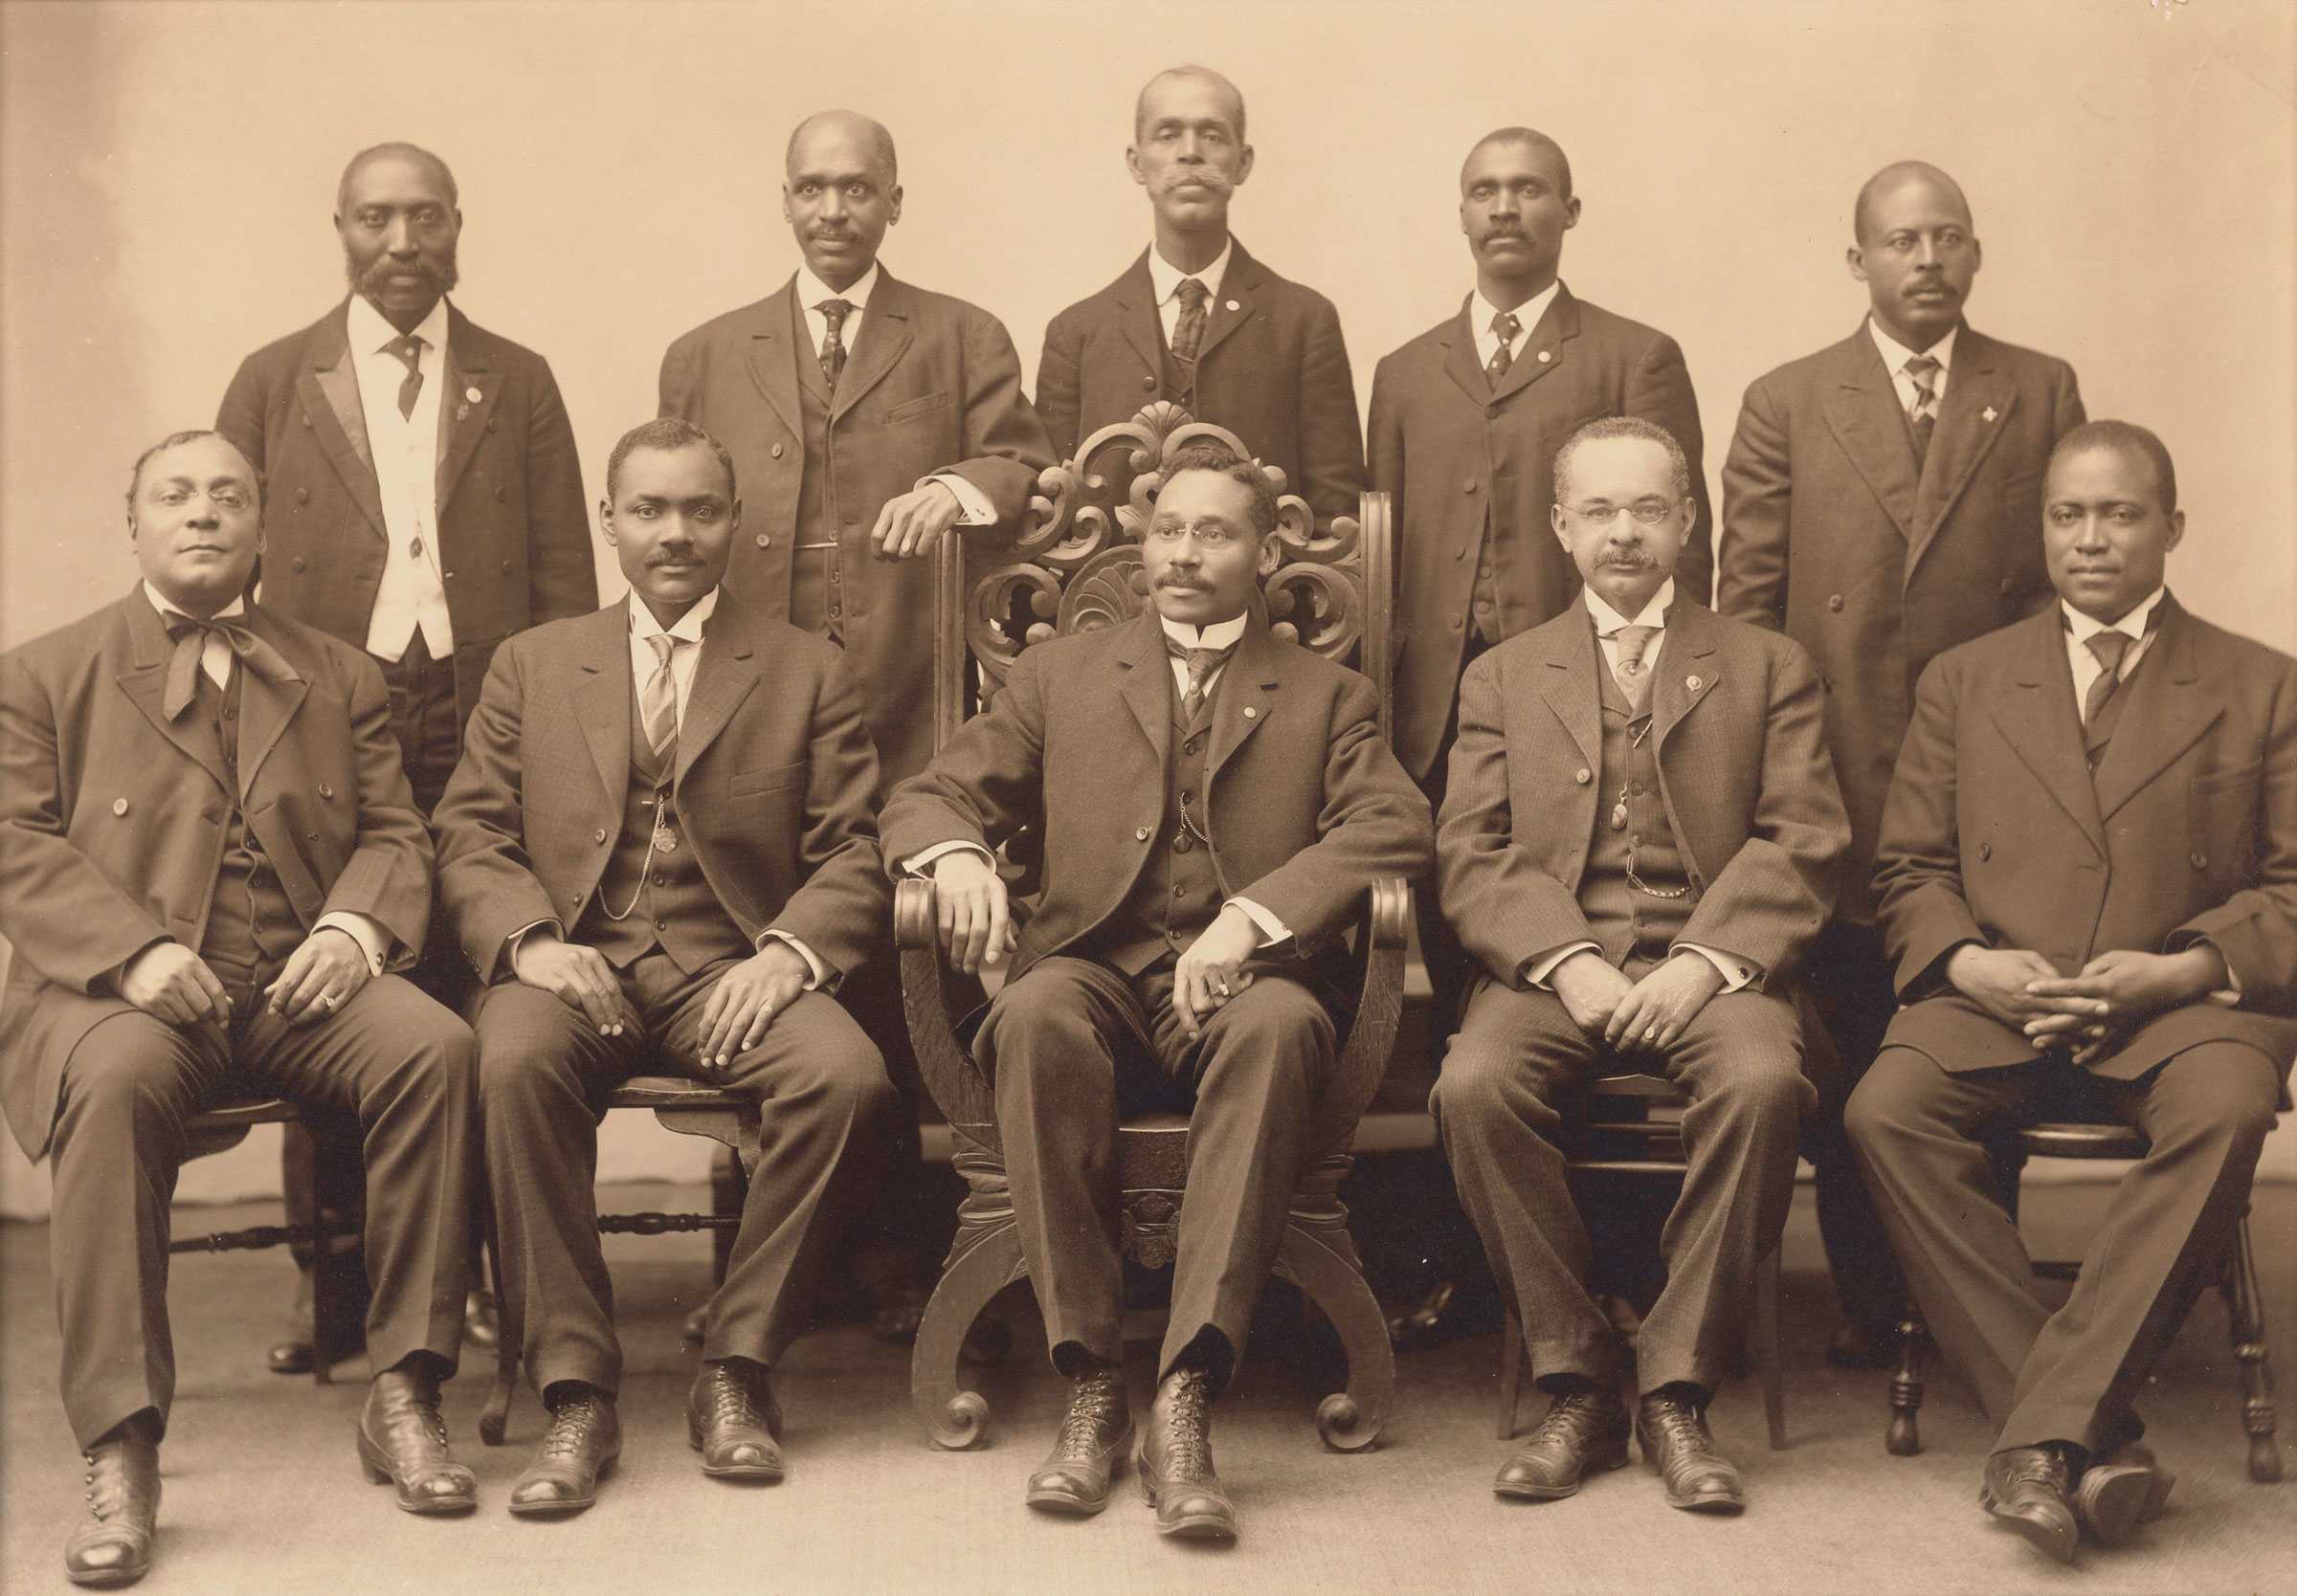 A sepia toned portrait of 10 committee members posing for the photo in a studio.